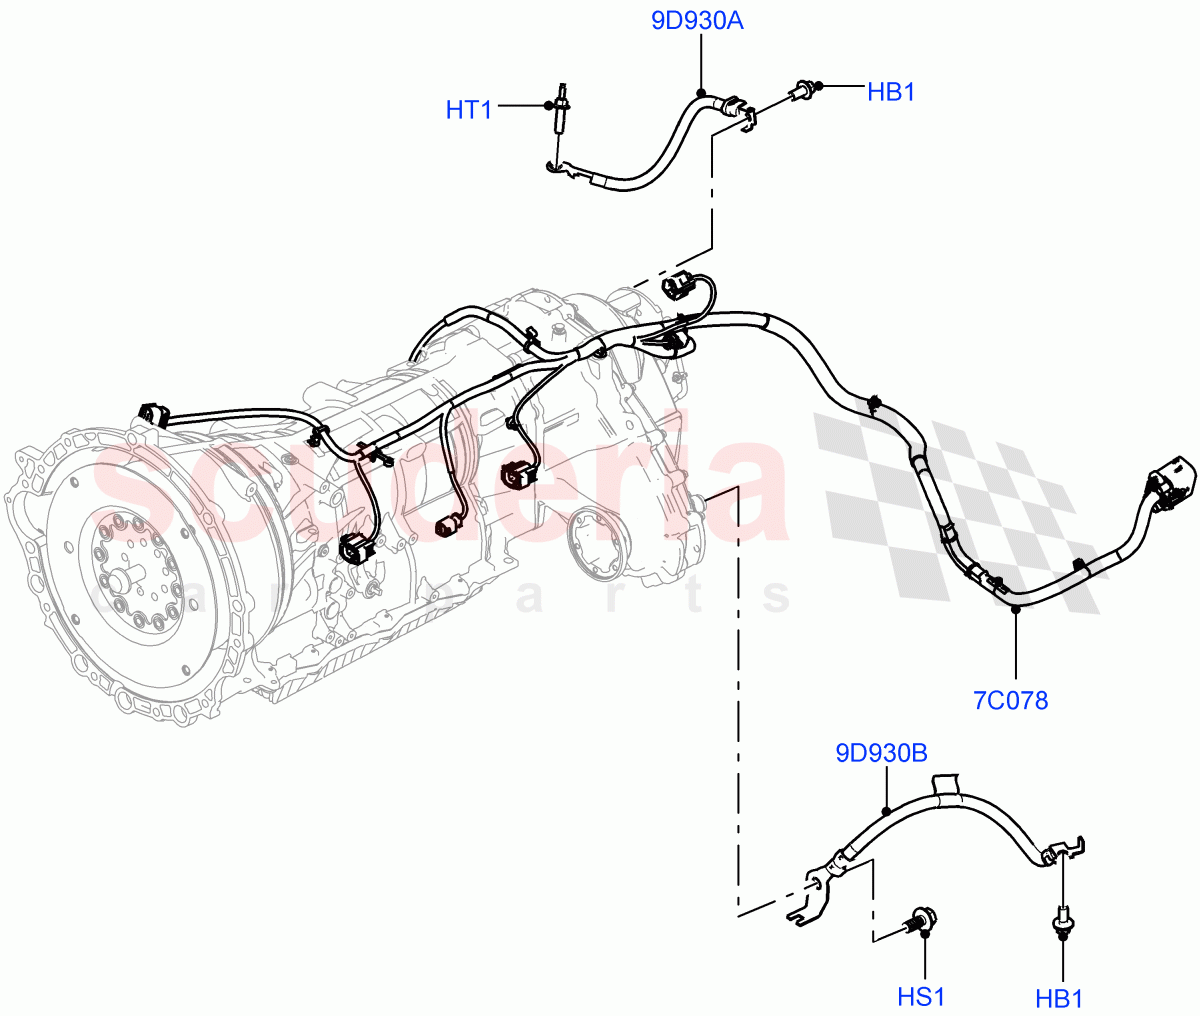 Transmission Harness(Solihull Plant Build)((V)FROMHA000001) of Land Rover Land Rover Discovery 5 (2017+) [2.0 Turbo Diesel]